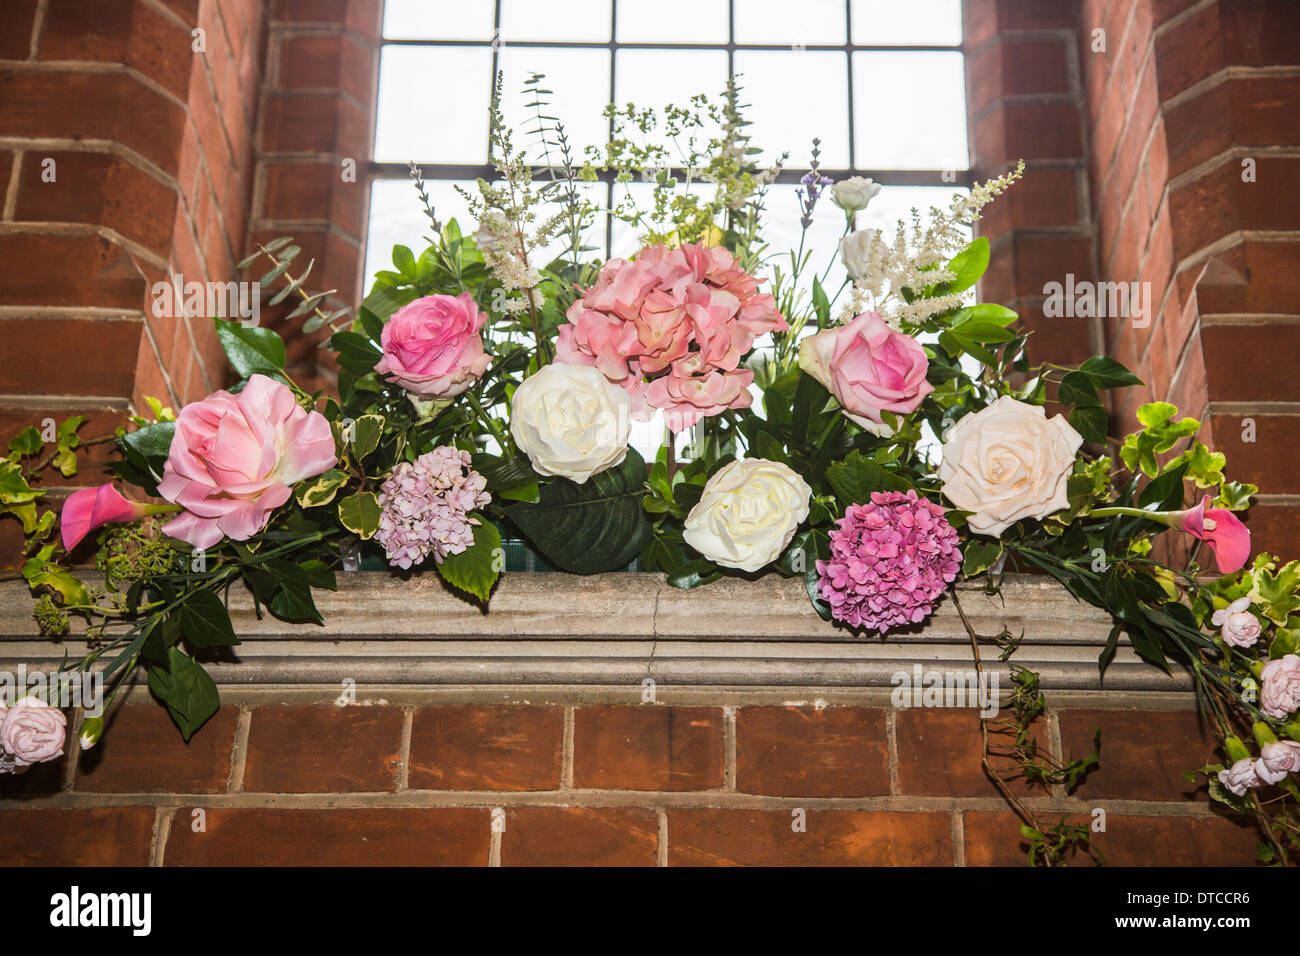 Flower arrangement / floral display with white peonies and green foliage with window and brick wall at Christ Church, Woking Stock Photo